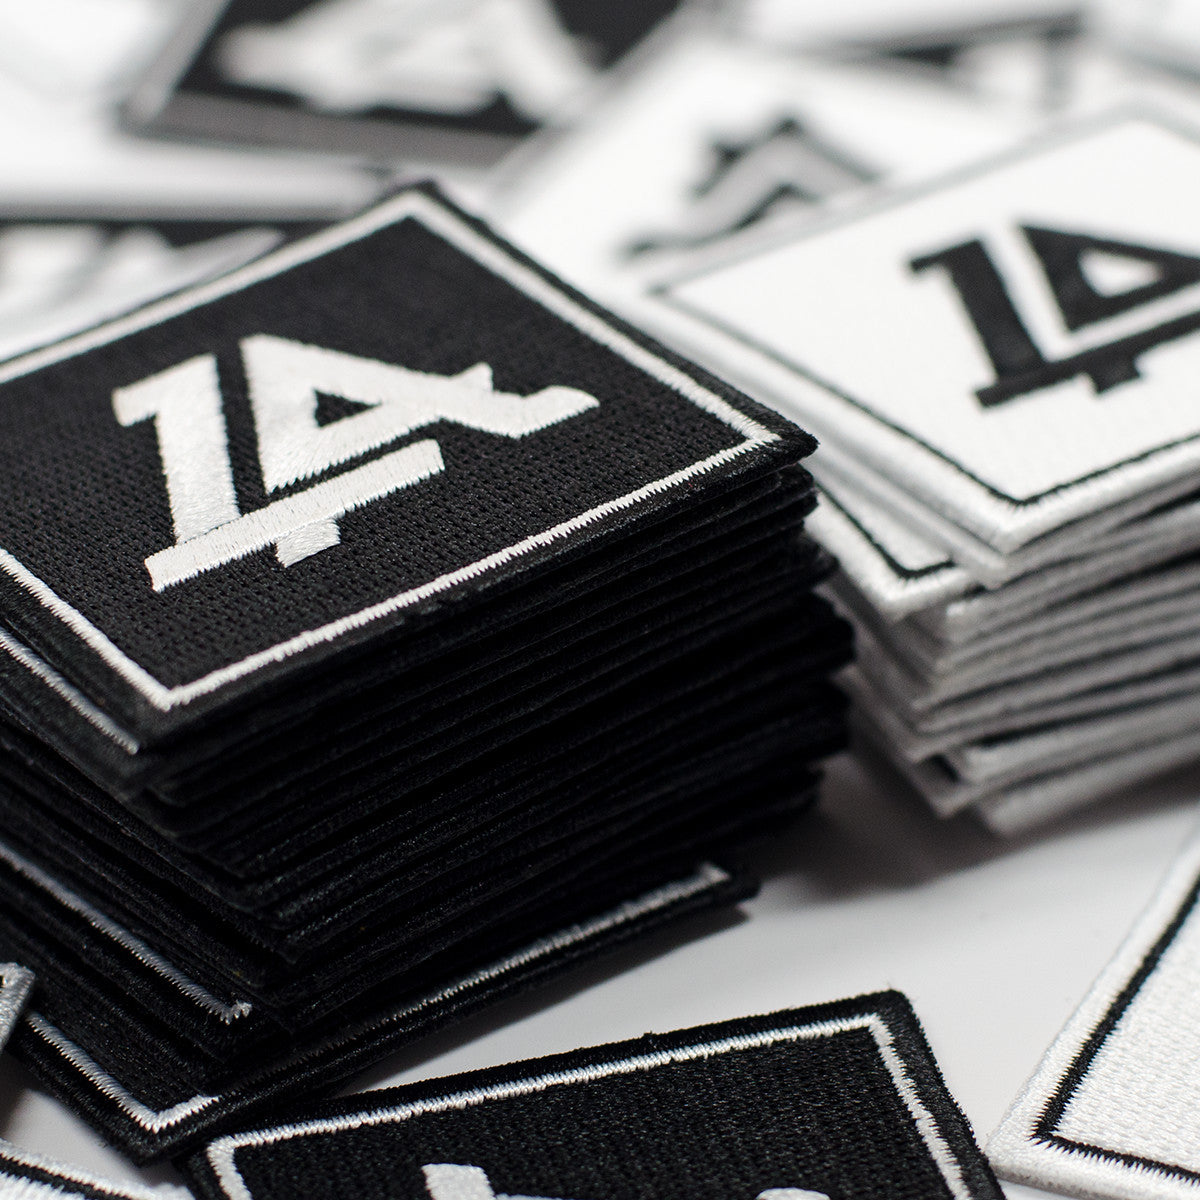 Lost Art Canada - black and white logo patches